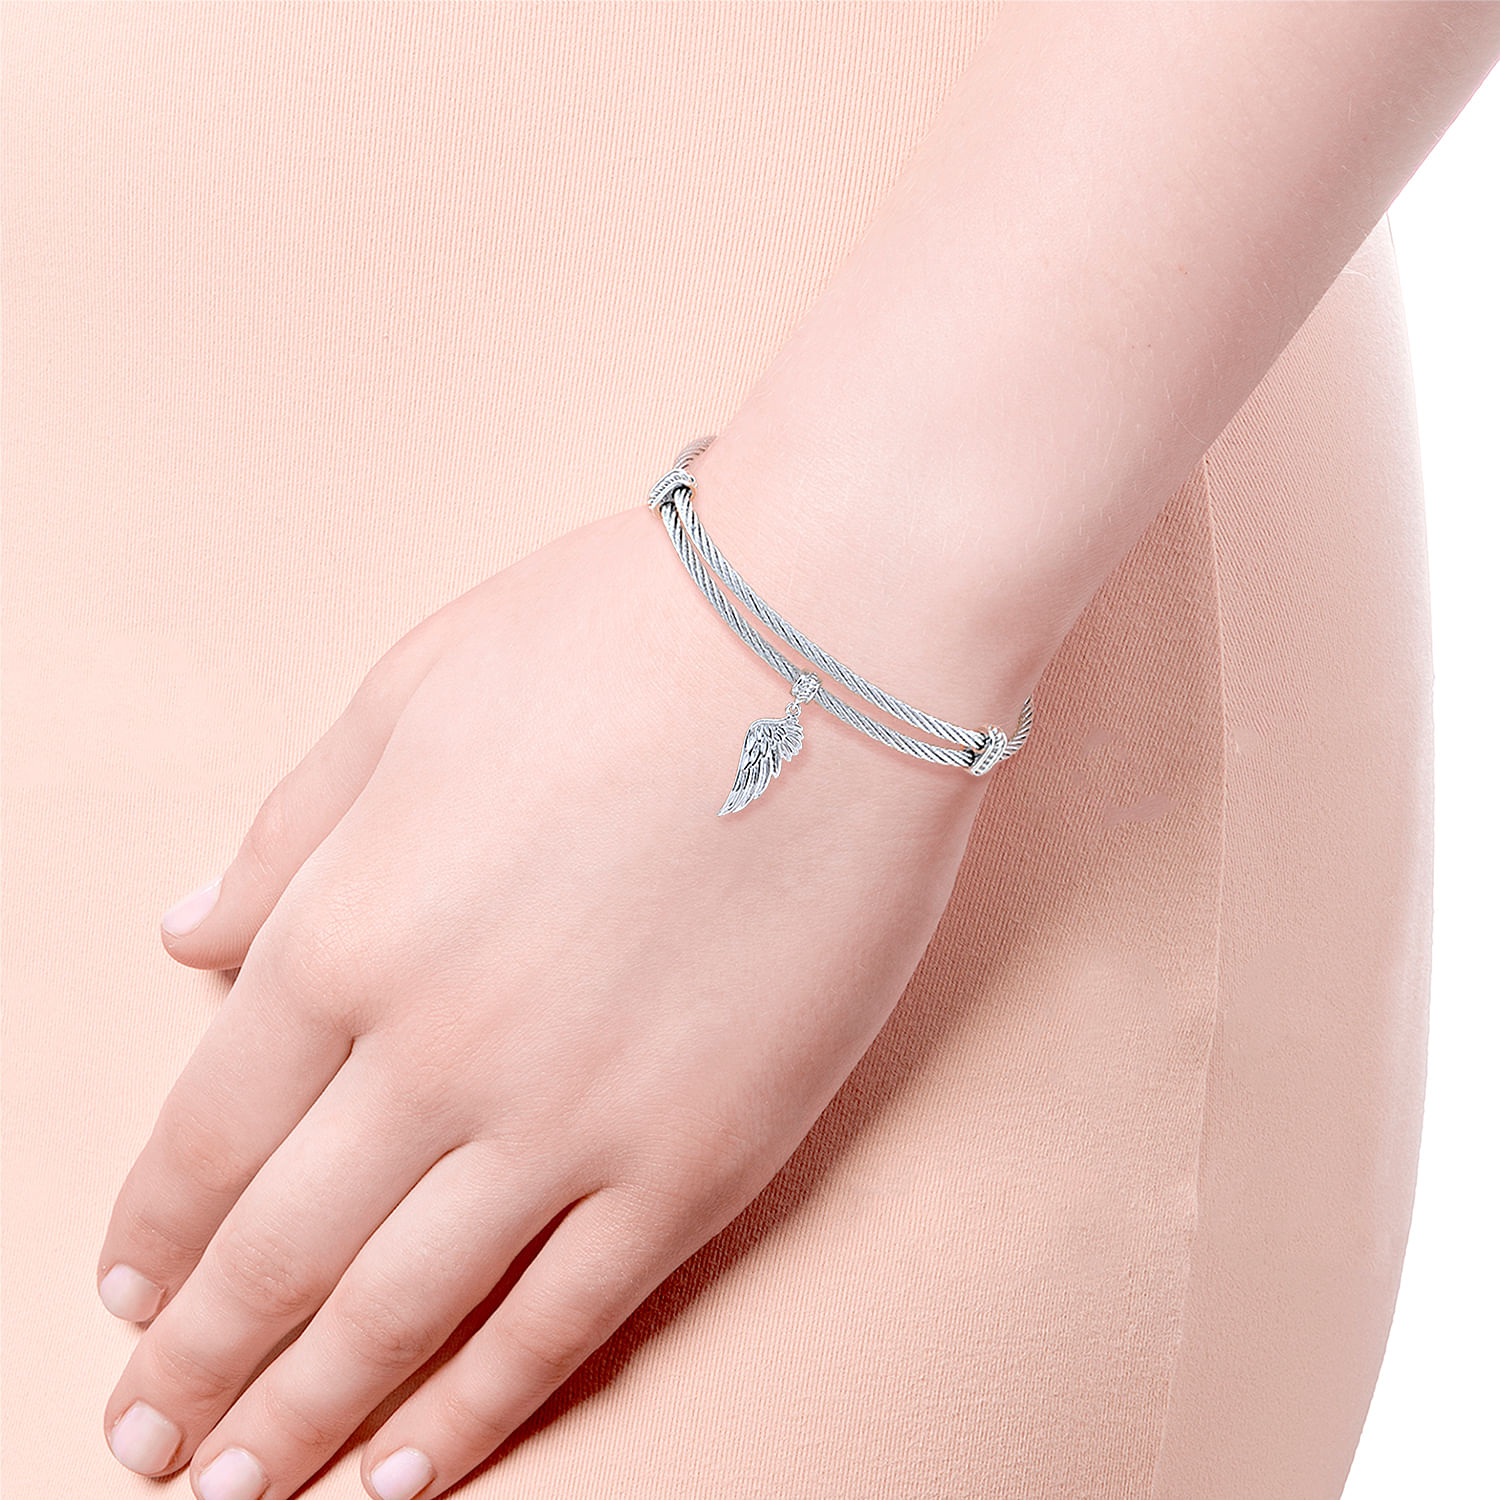 Adjustable Twisted Cable Stainless Steel Bangle with Sterling Silver Angel Wing Charm - Shot 3